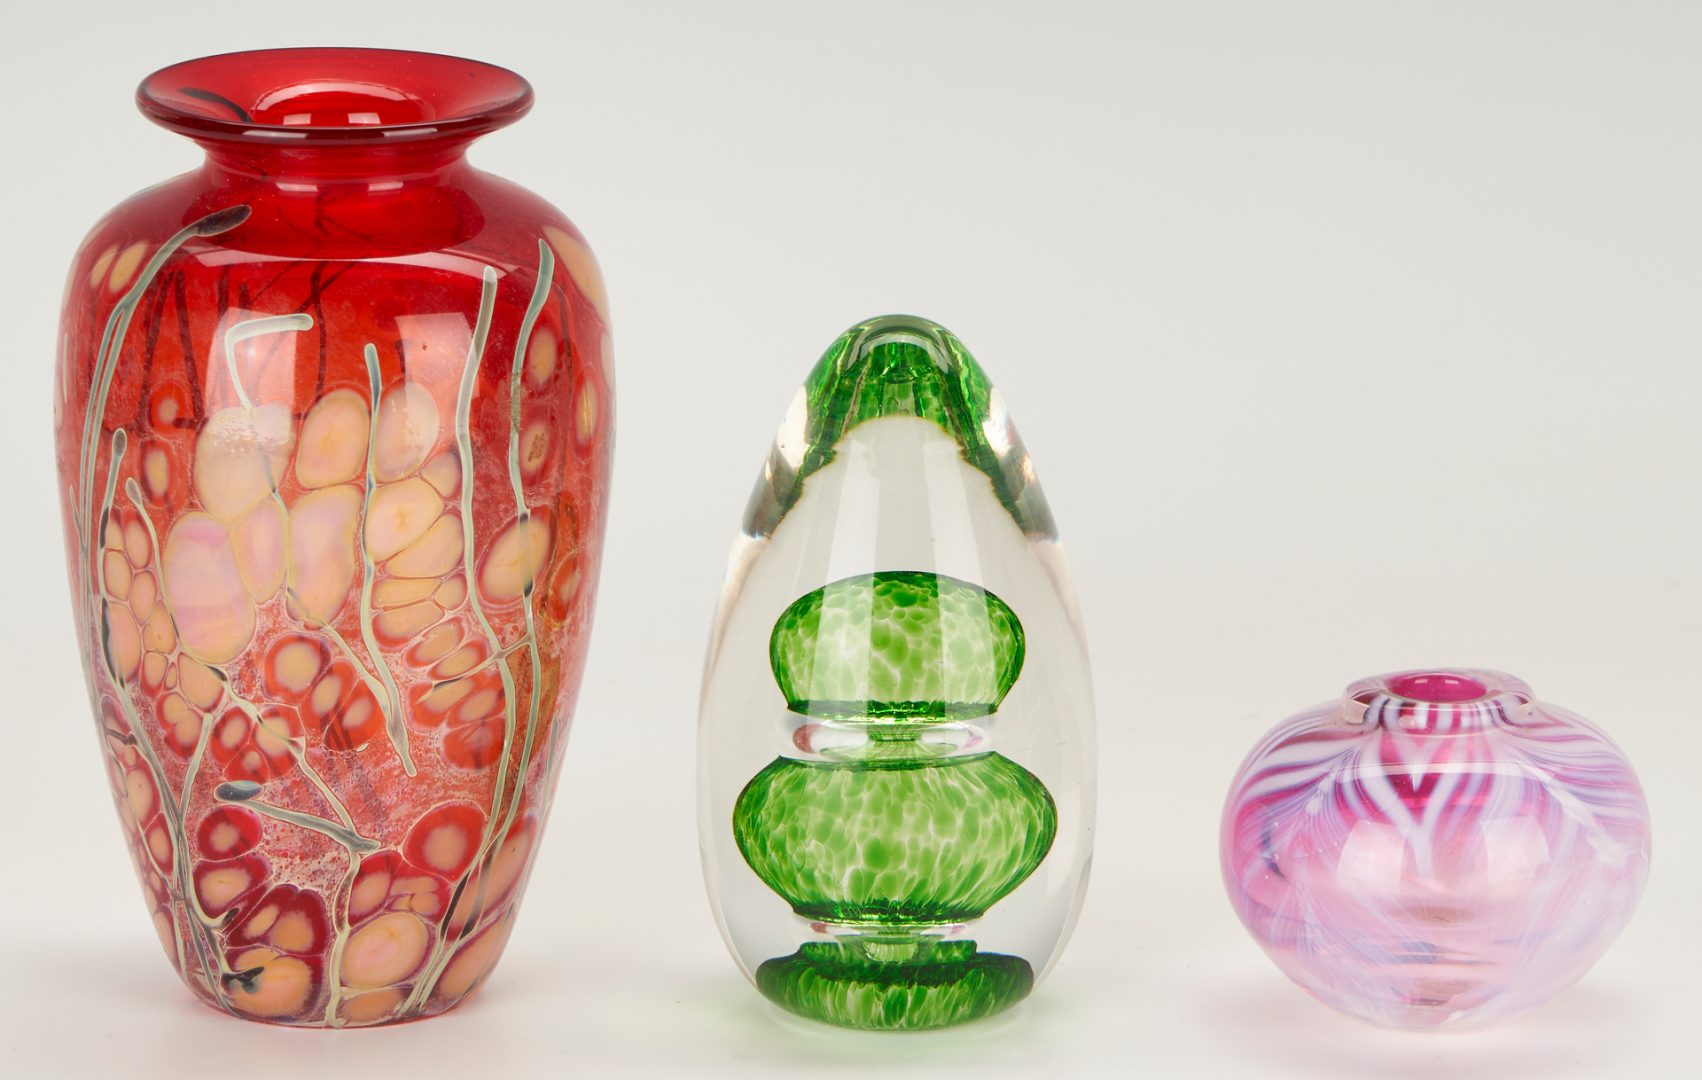 Lot 349: 5 Art Glass Items: 3 Paperweights and 2 Vases